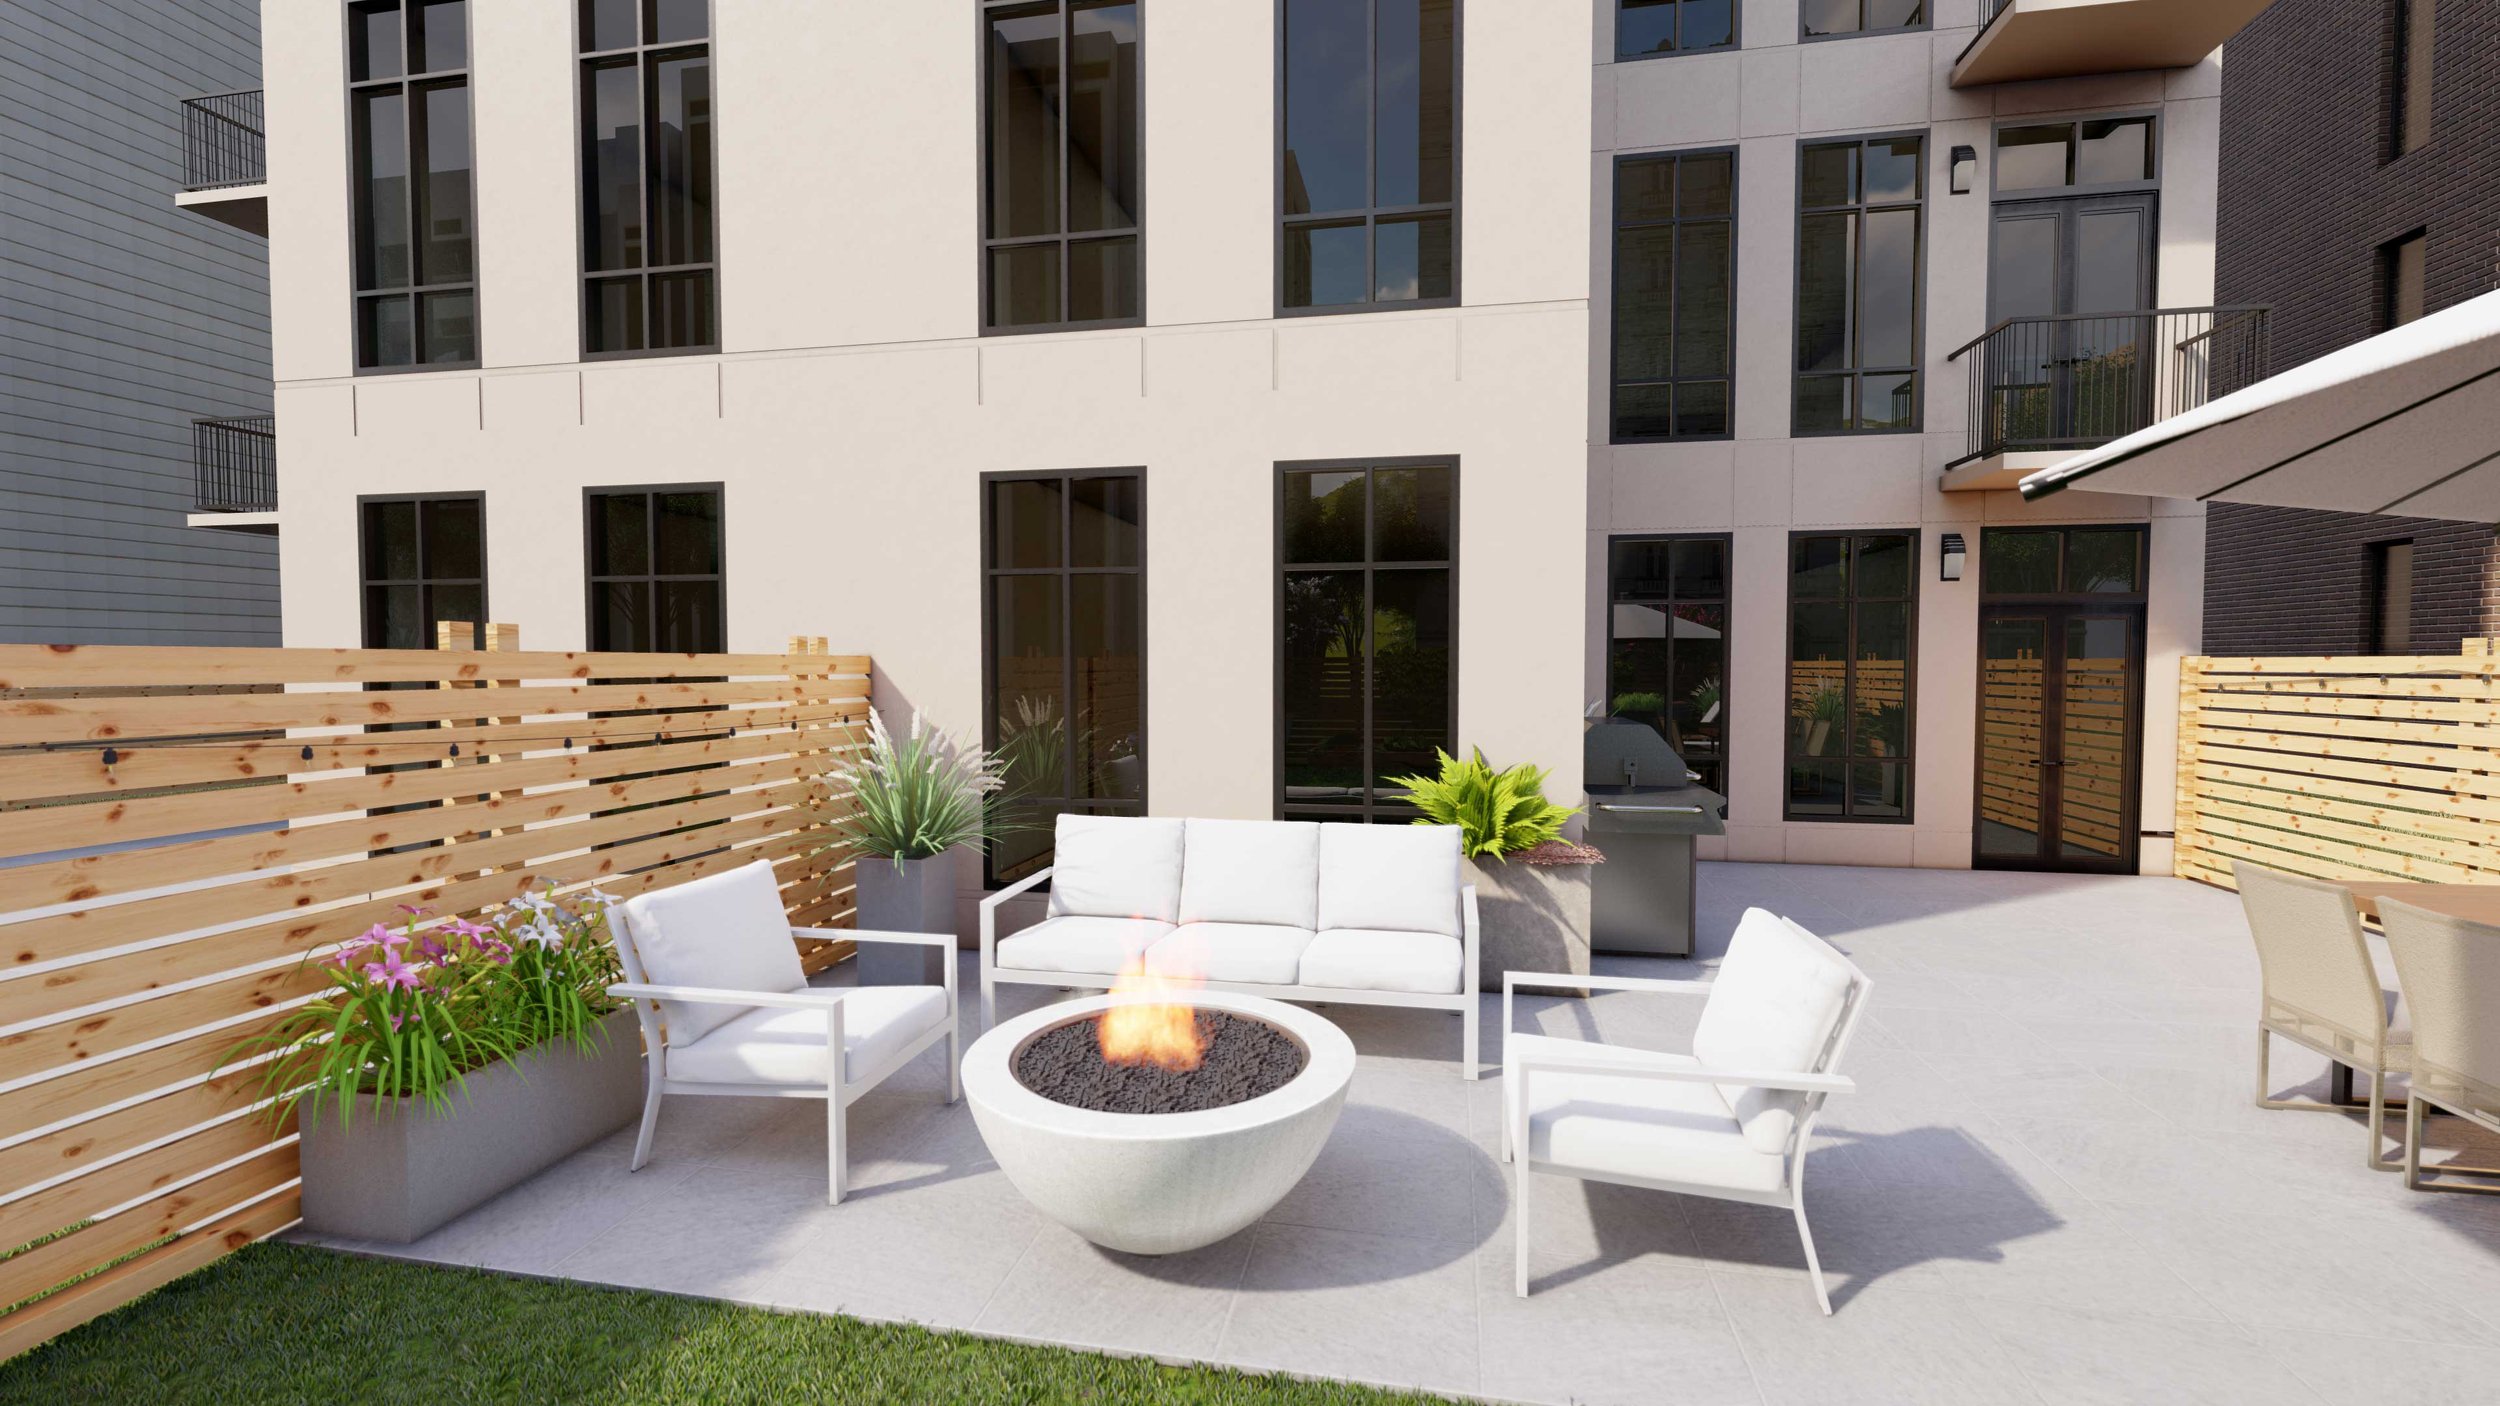 Side outdoor sitting area, with fire pit, plant pots and artificial grass.